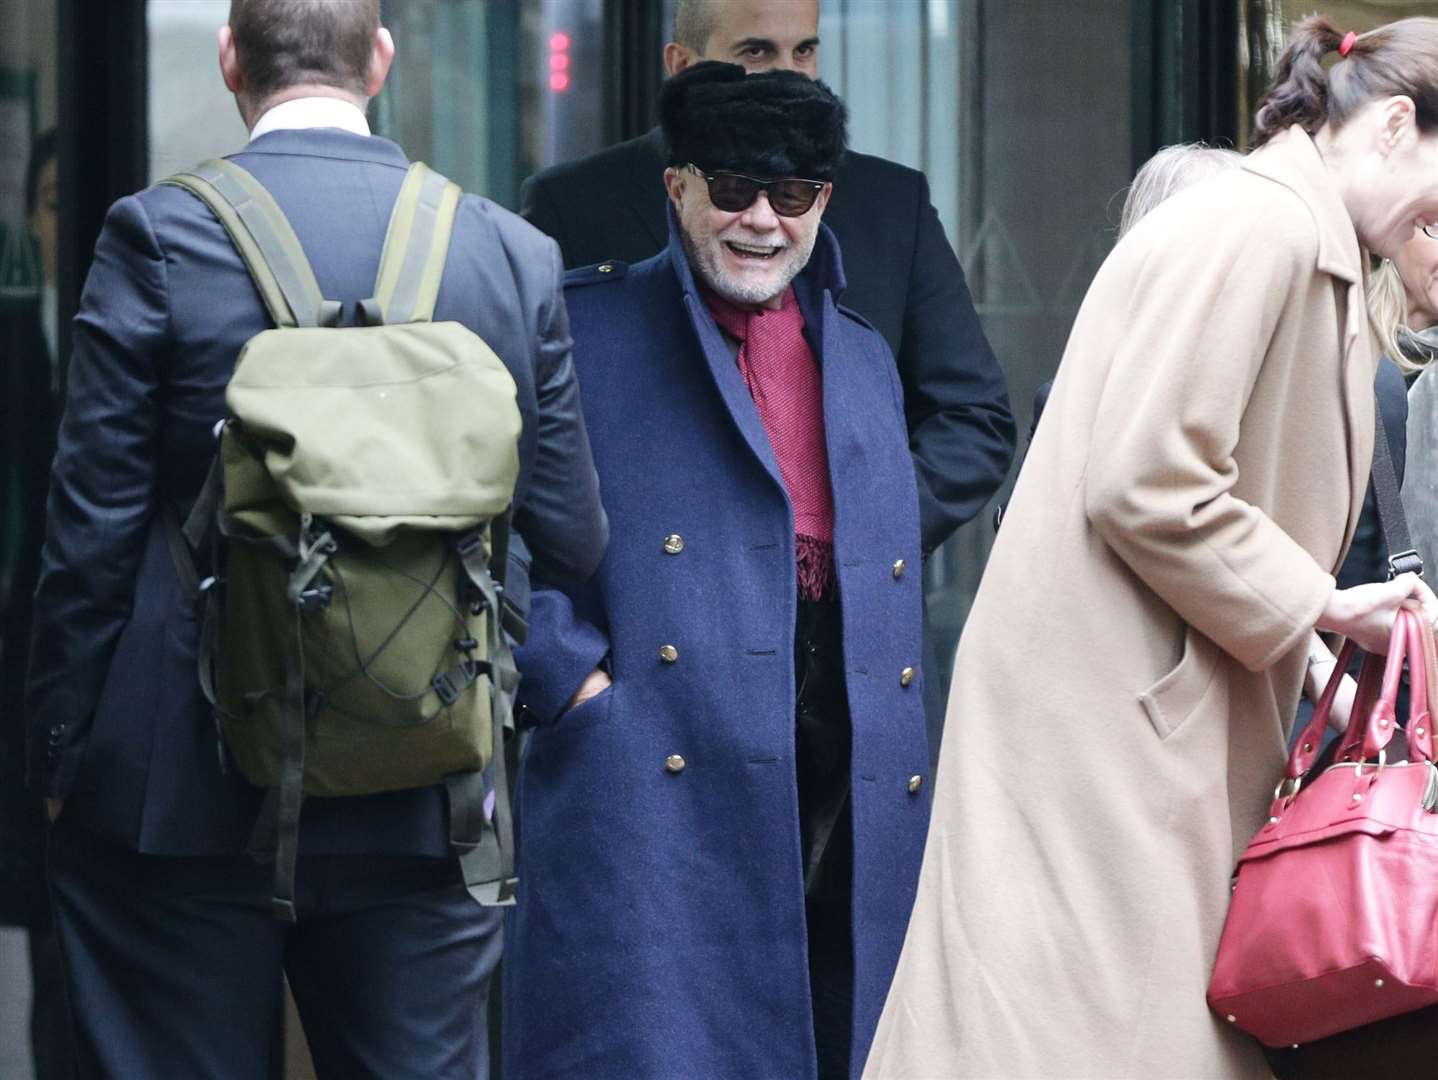 Former pop star Gary Glitter, real name Paul Gadd, arriving at Southwark Crown Court in London (Yui Mok/PA)